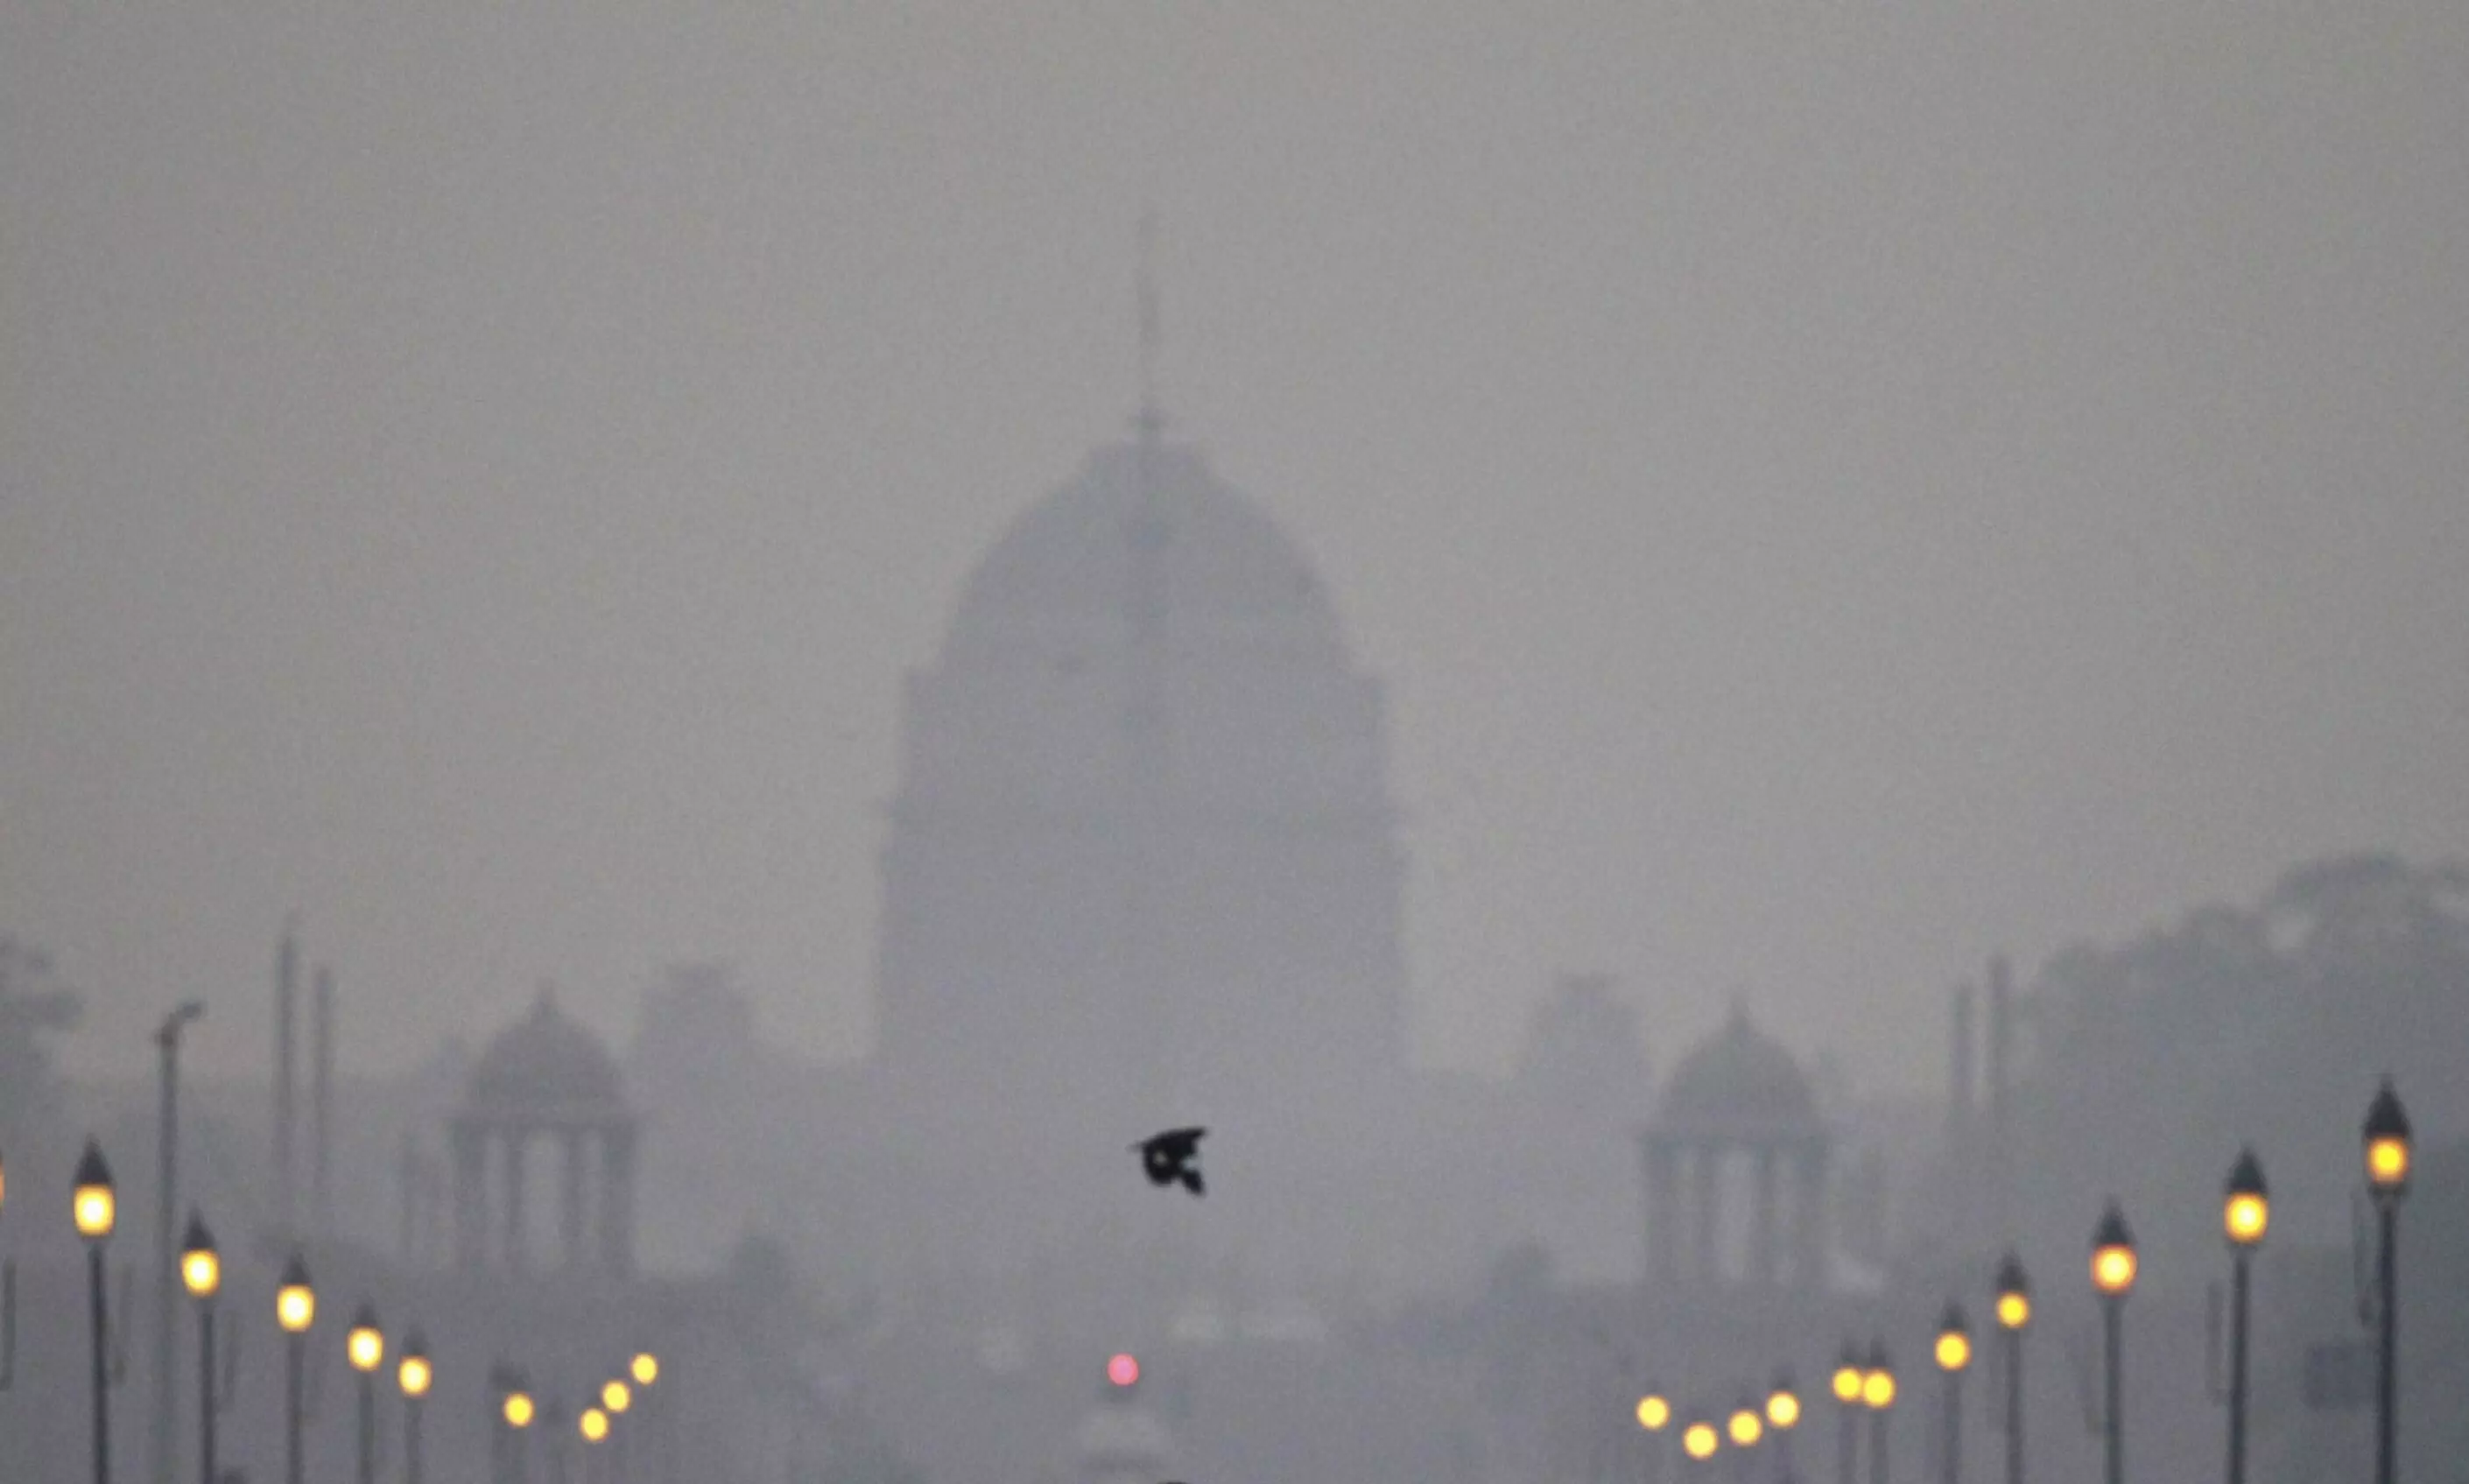 Delhi worlds most polluted capital city again: Report